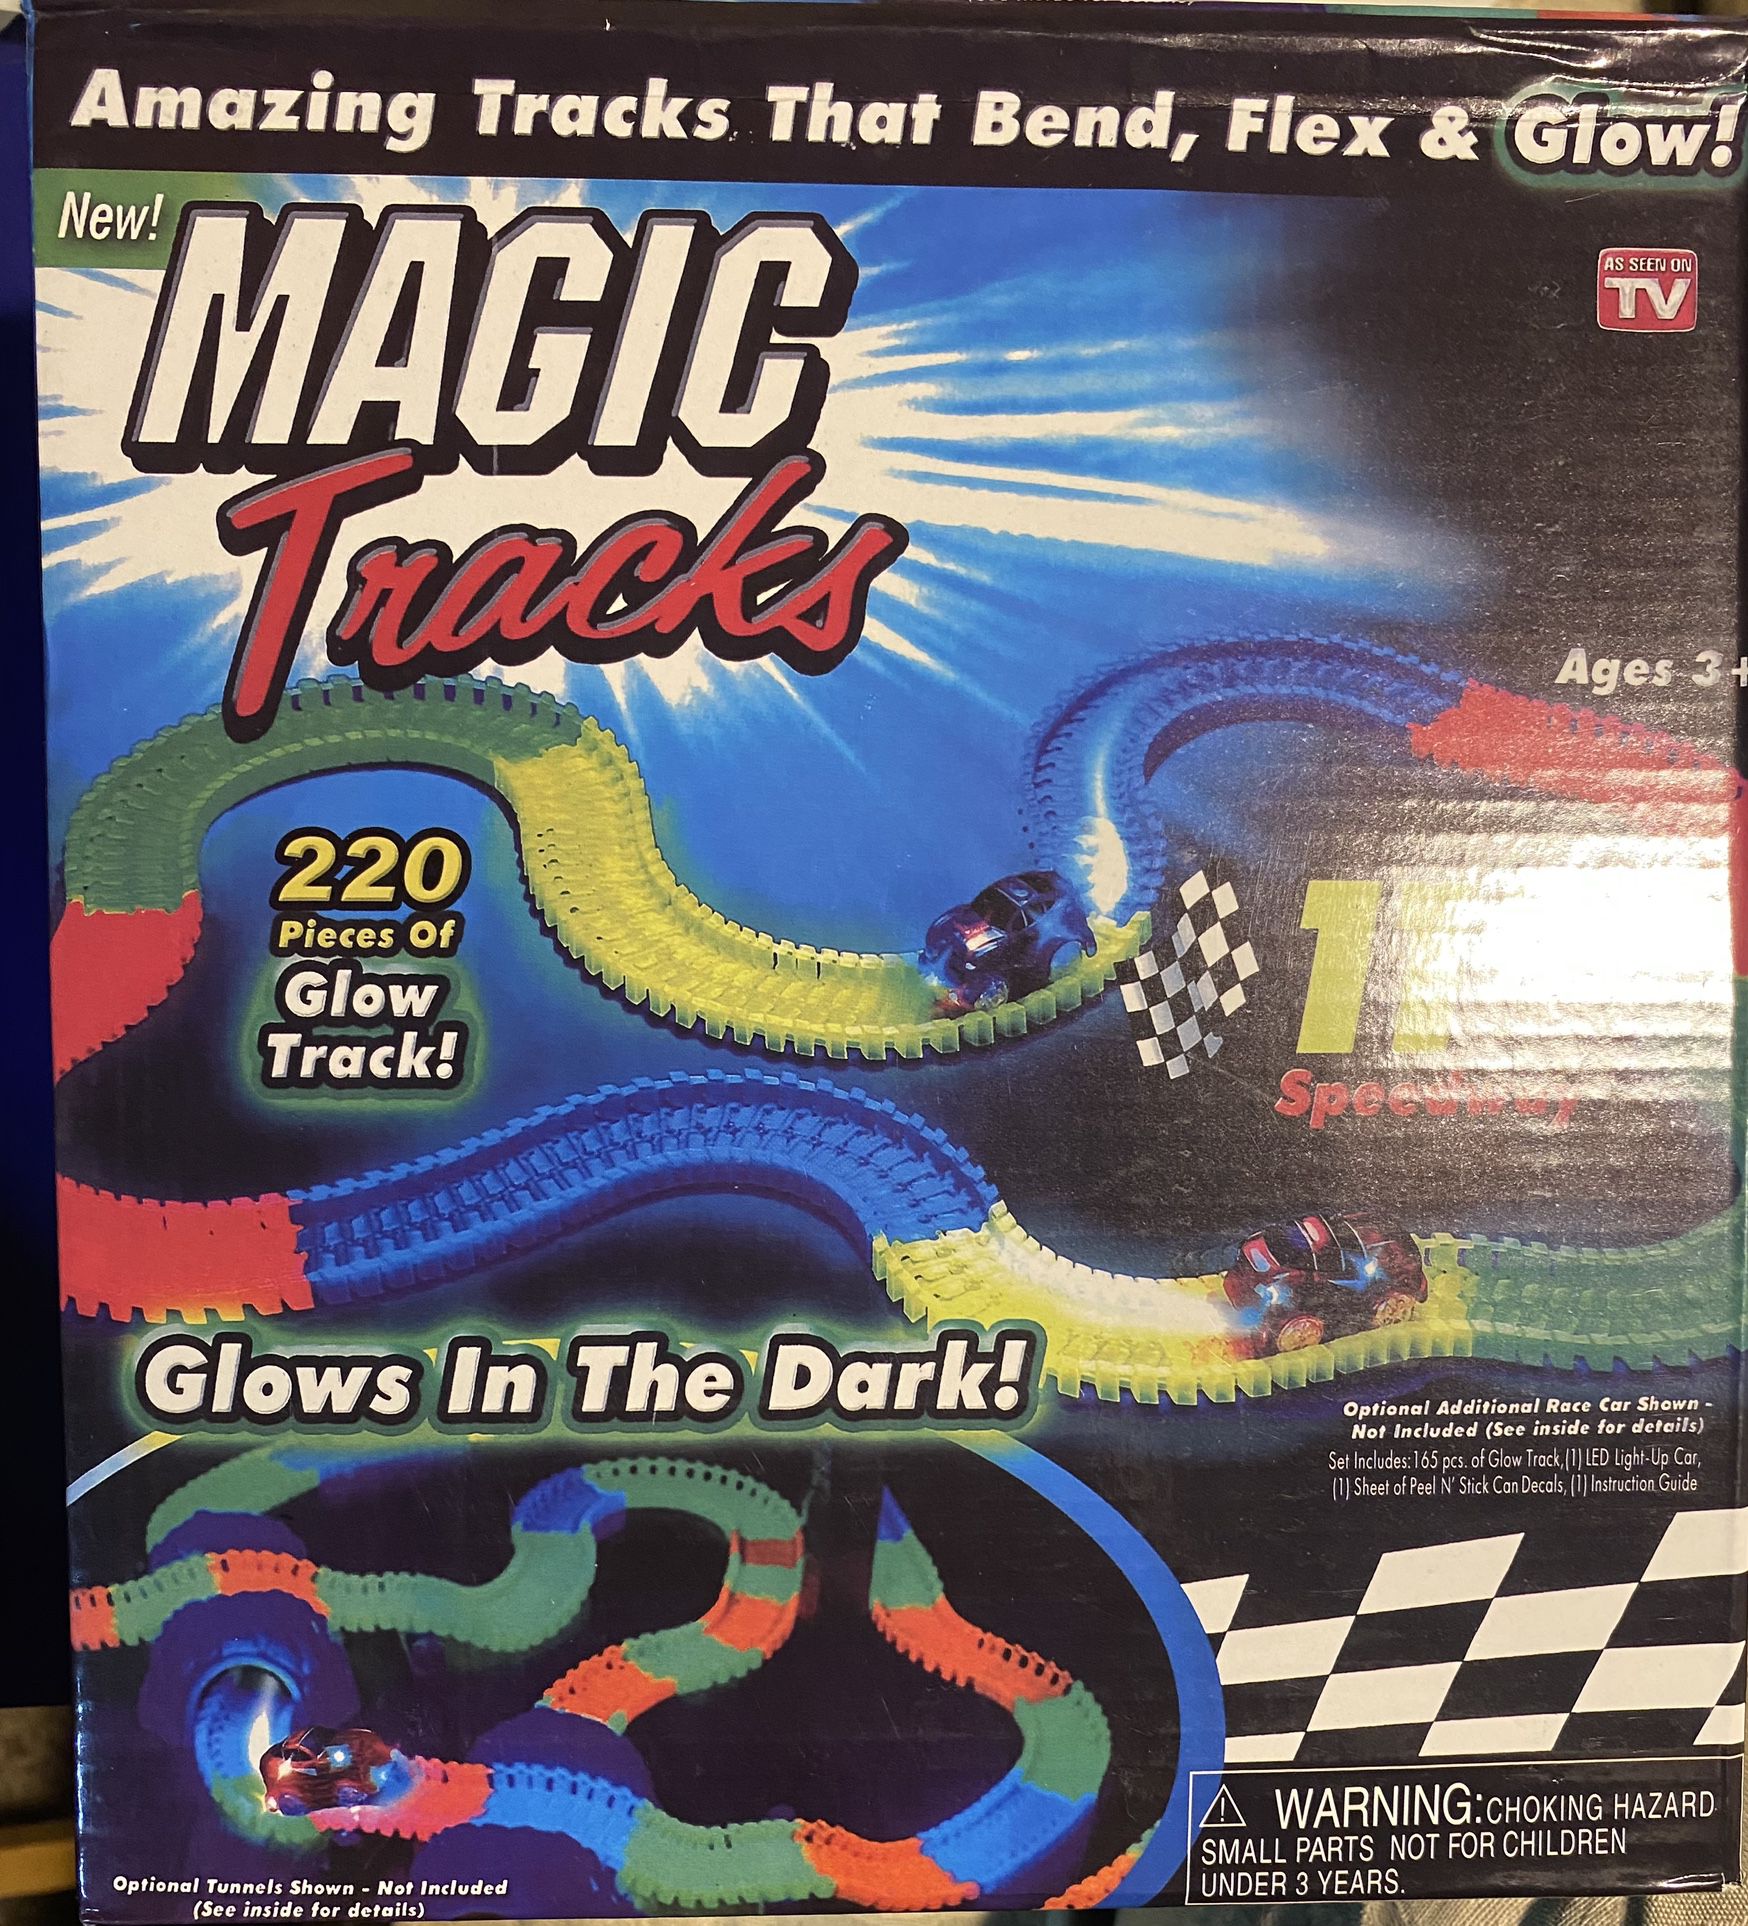 Magic Tracks The Amazing Racetrack That Can Bend, Flex and Glow - As Seen on TV